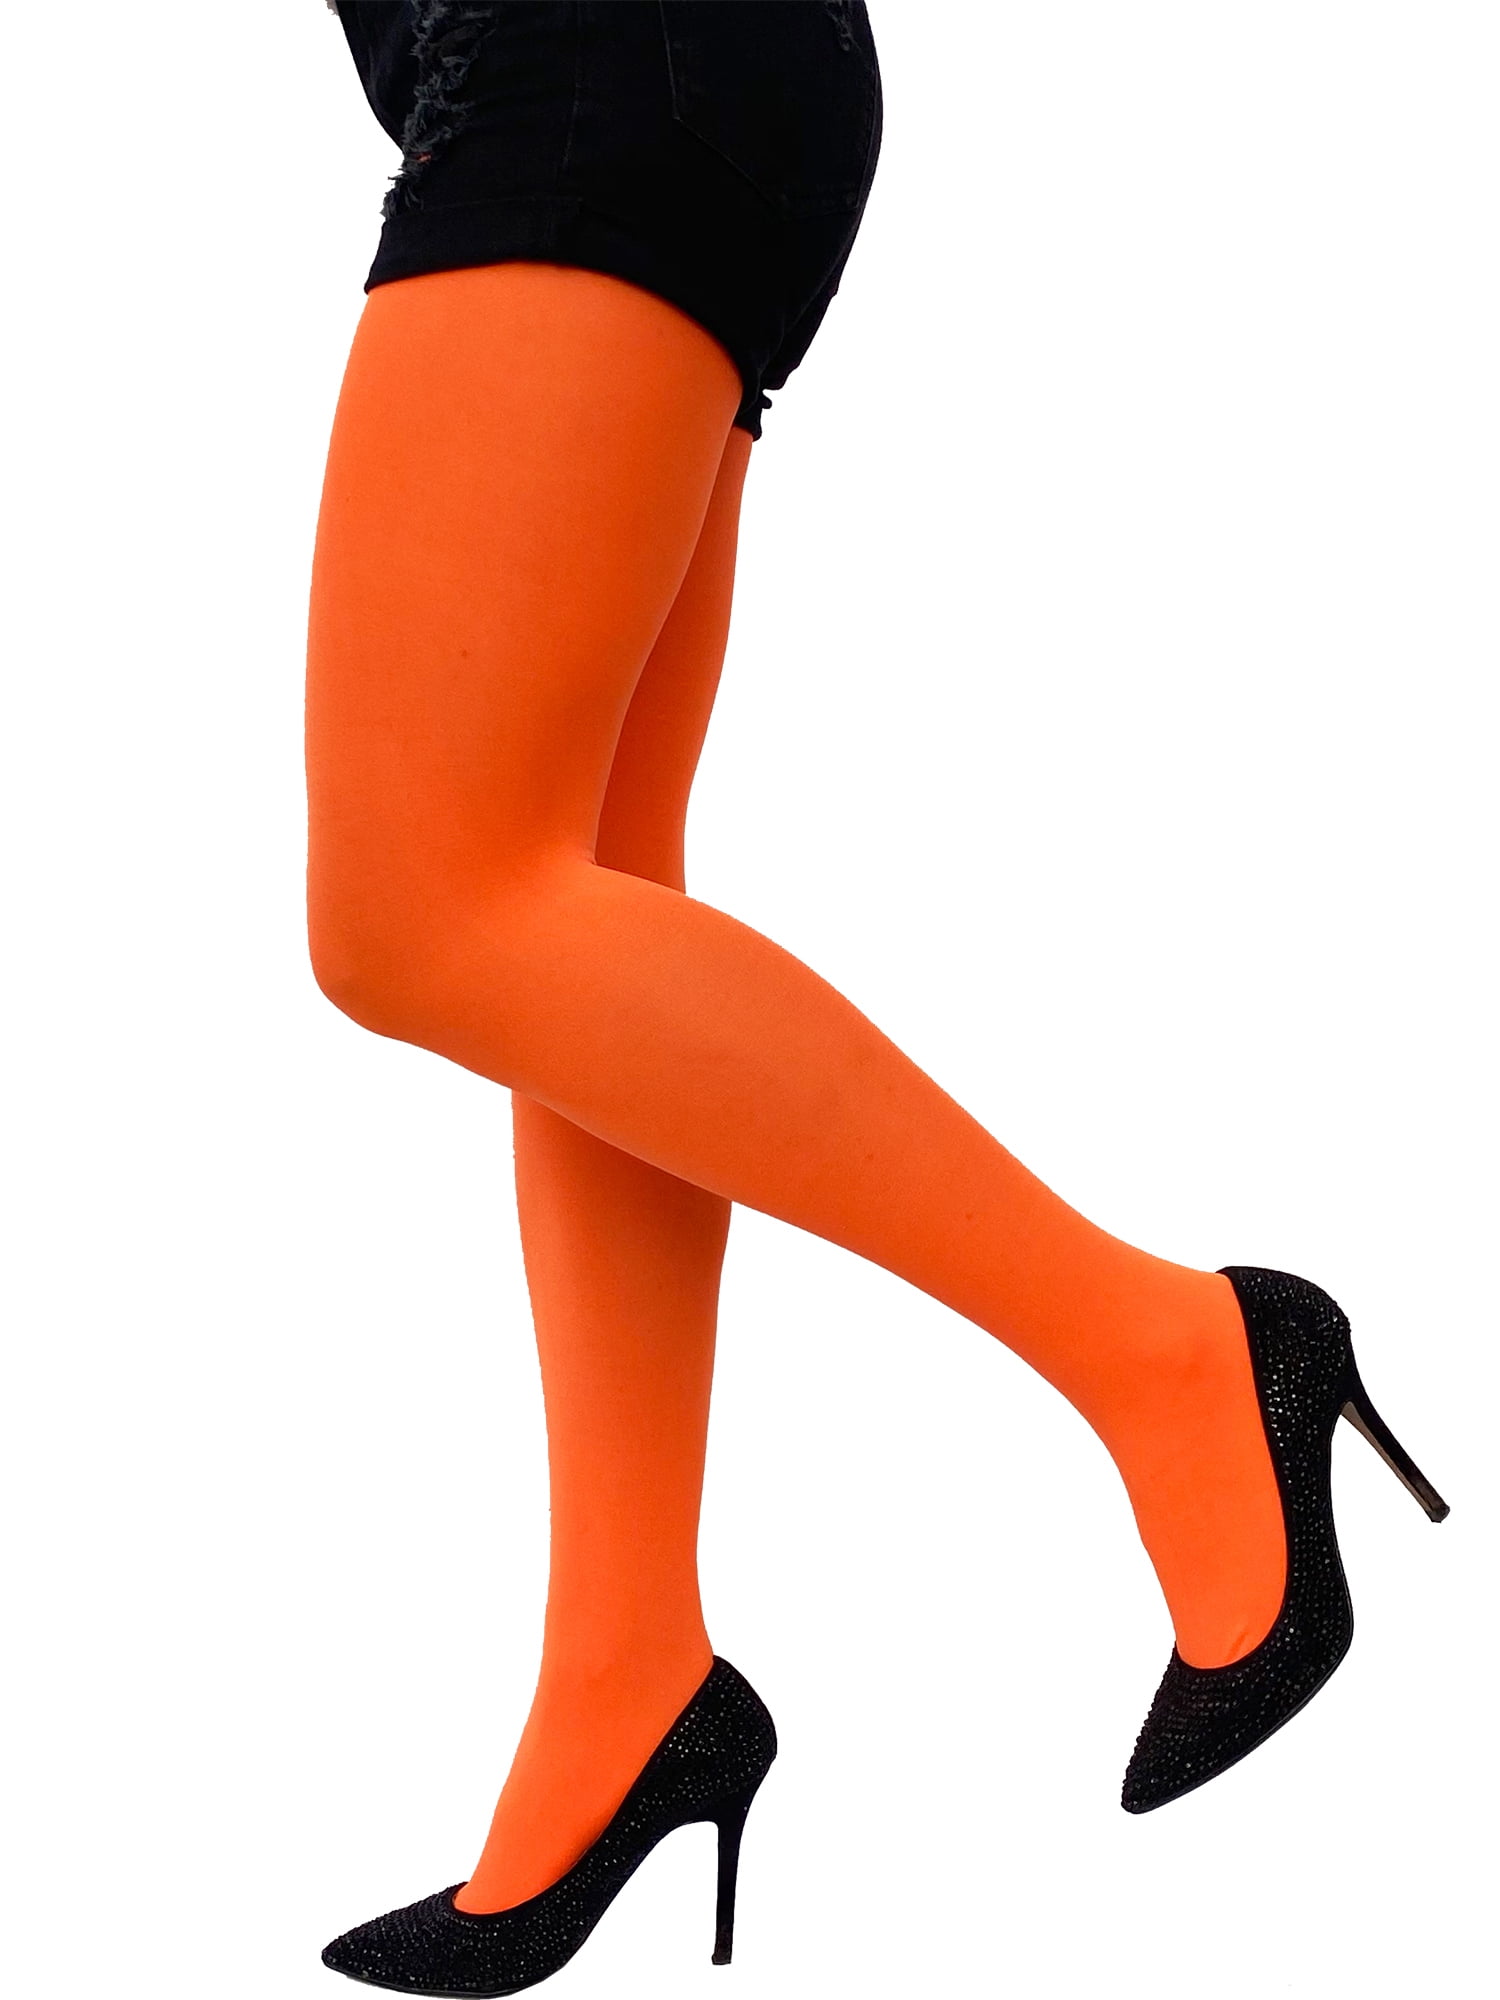 Malka Chic Neon Orange Opaque Full Footed Tights Pantyhose For Women